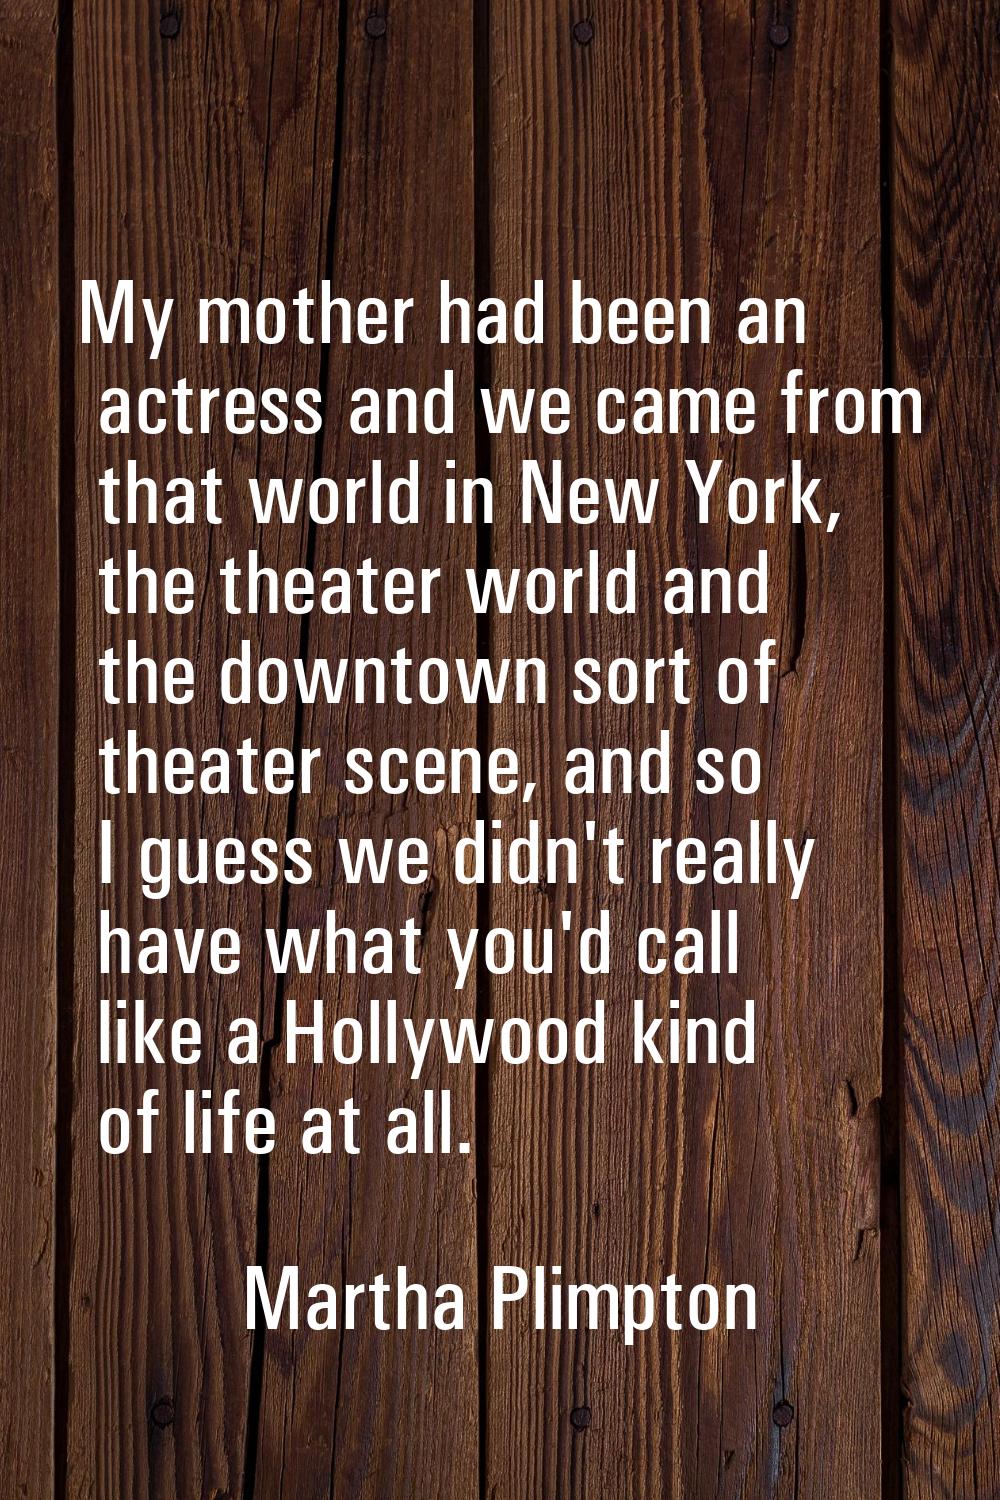 My mother had been an actress and we came from that world in New York, the theater world and the do